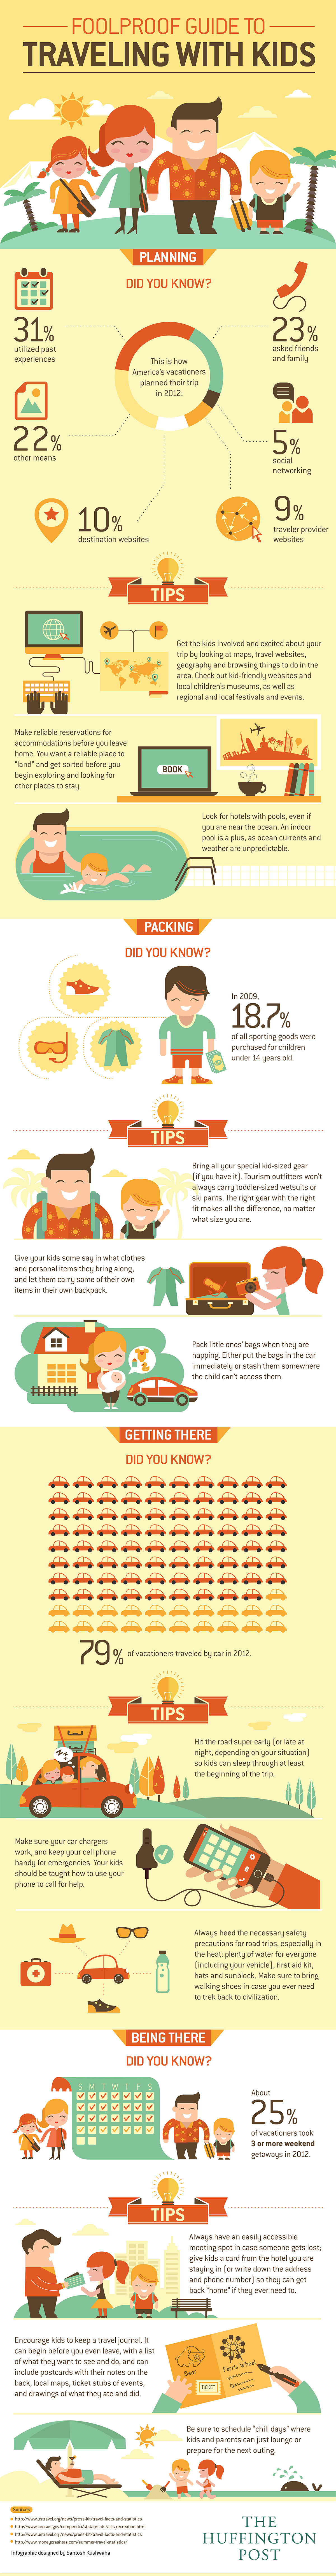 FOOLPROOF GUIDE TO TRAVELING WITH KIDS